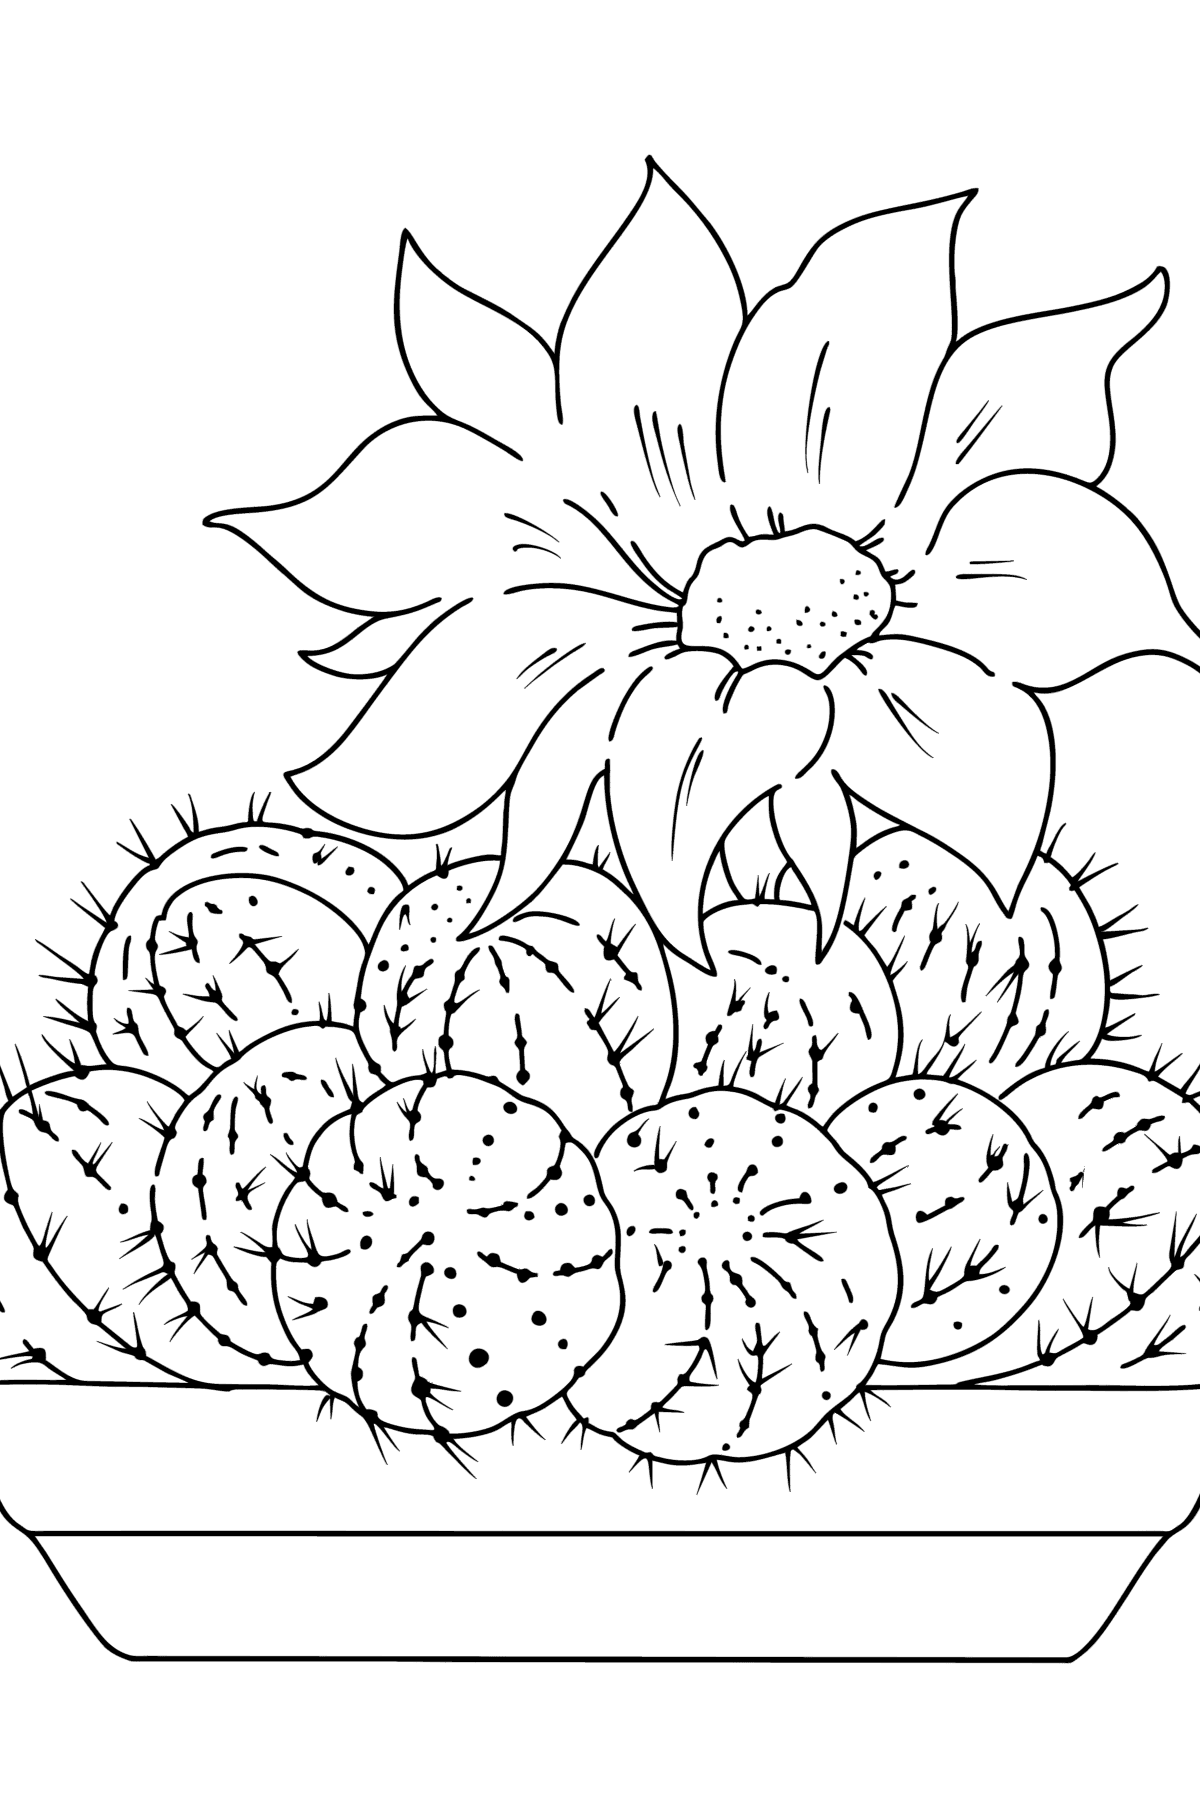 Little Nipple Cactus Coloring page - Coloring Pages for Kids